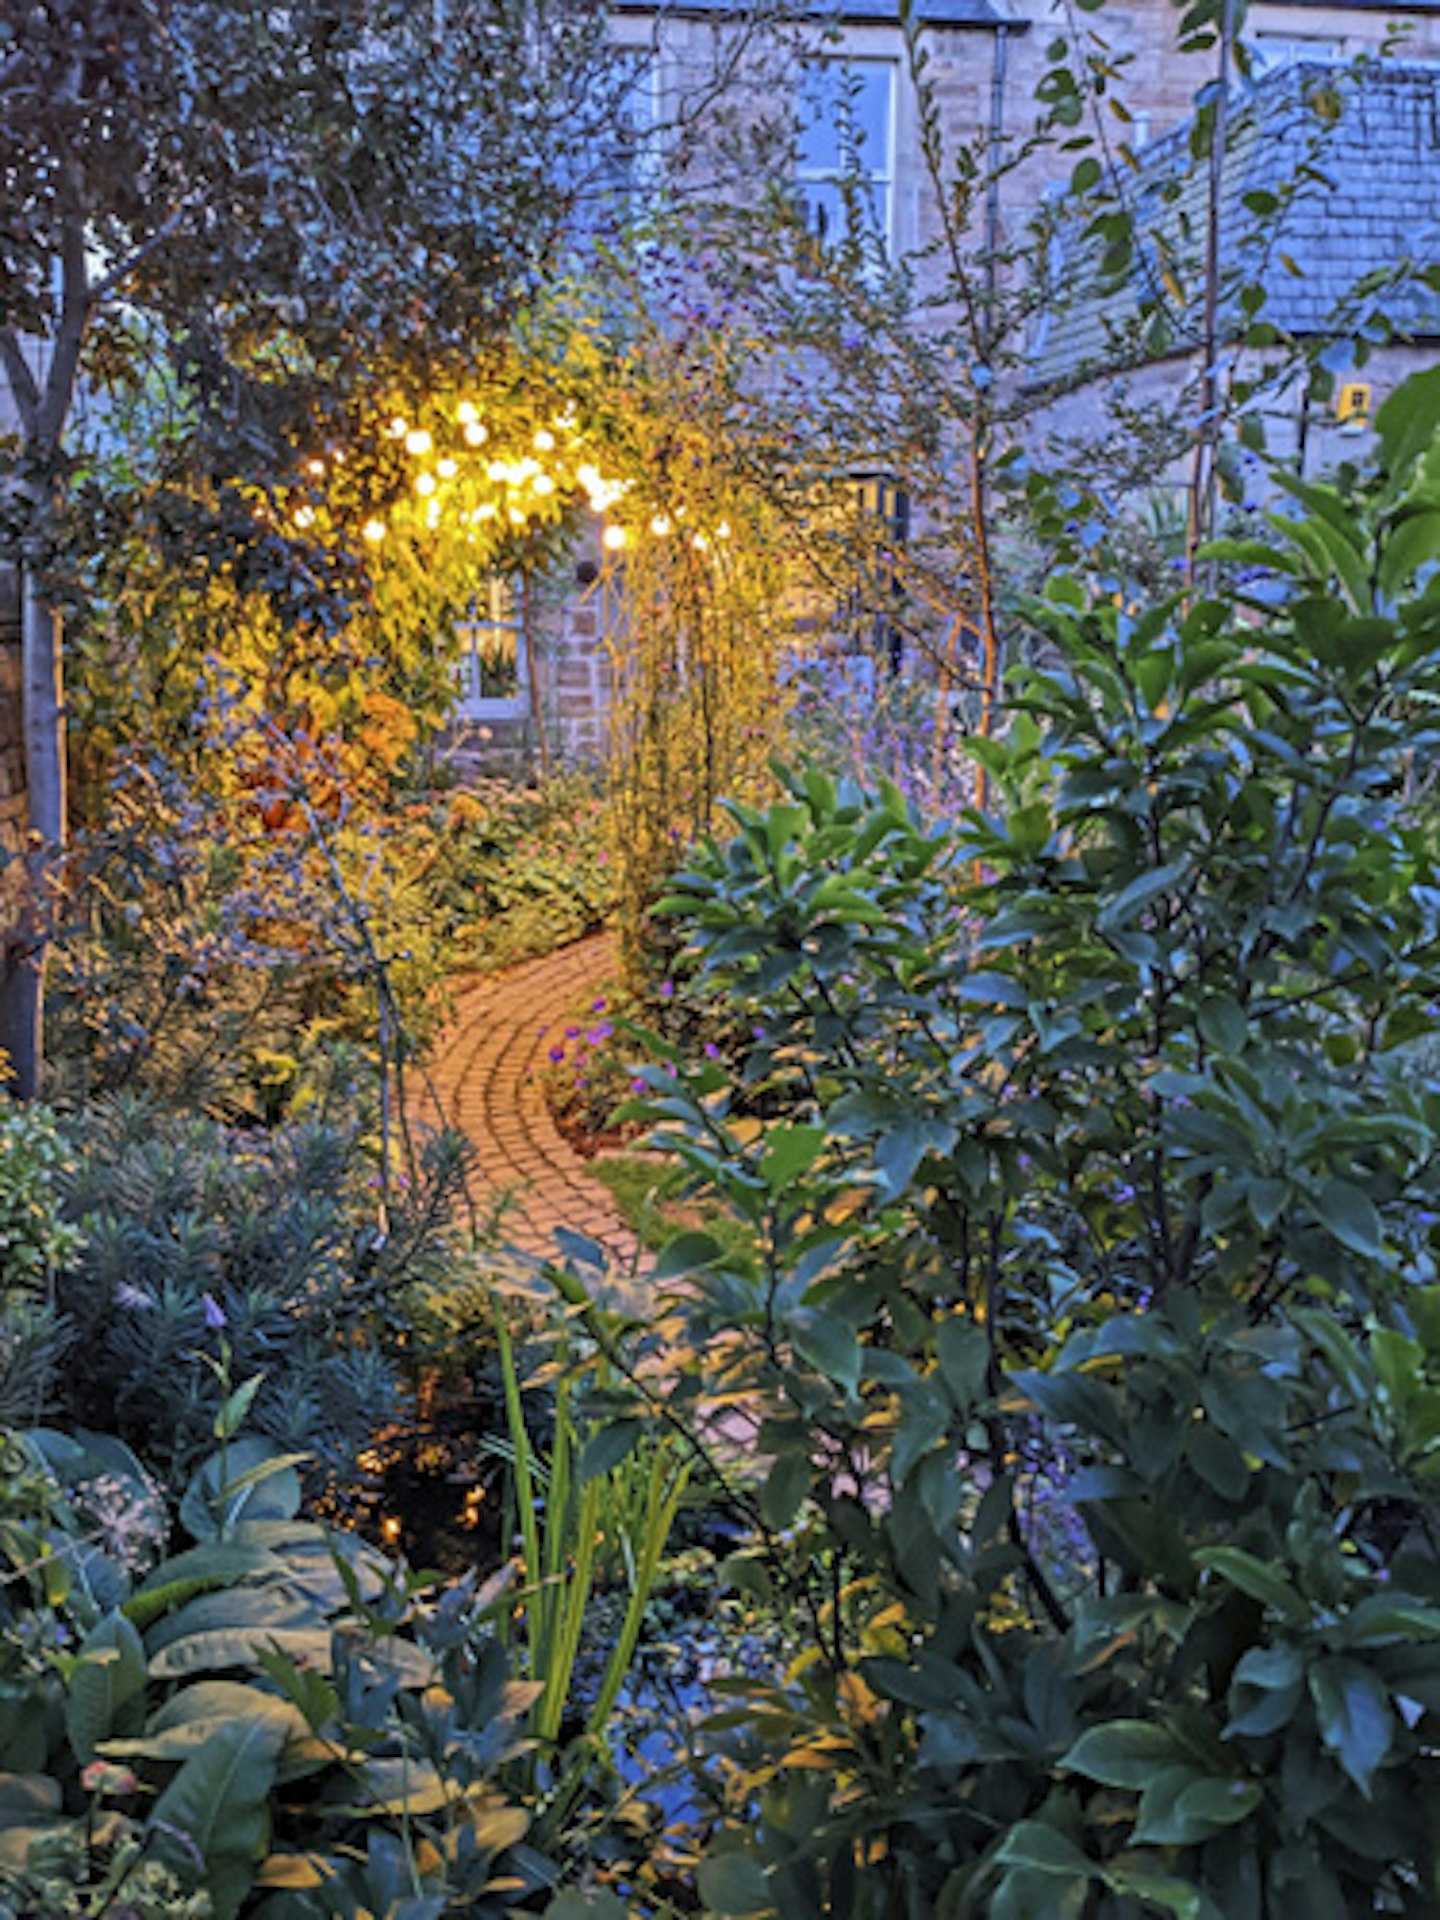 An aromatic arch of Solanum crispum and jasmine lit up at night